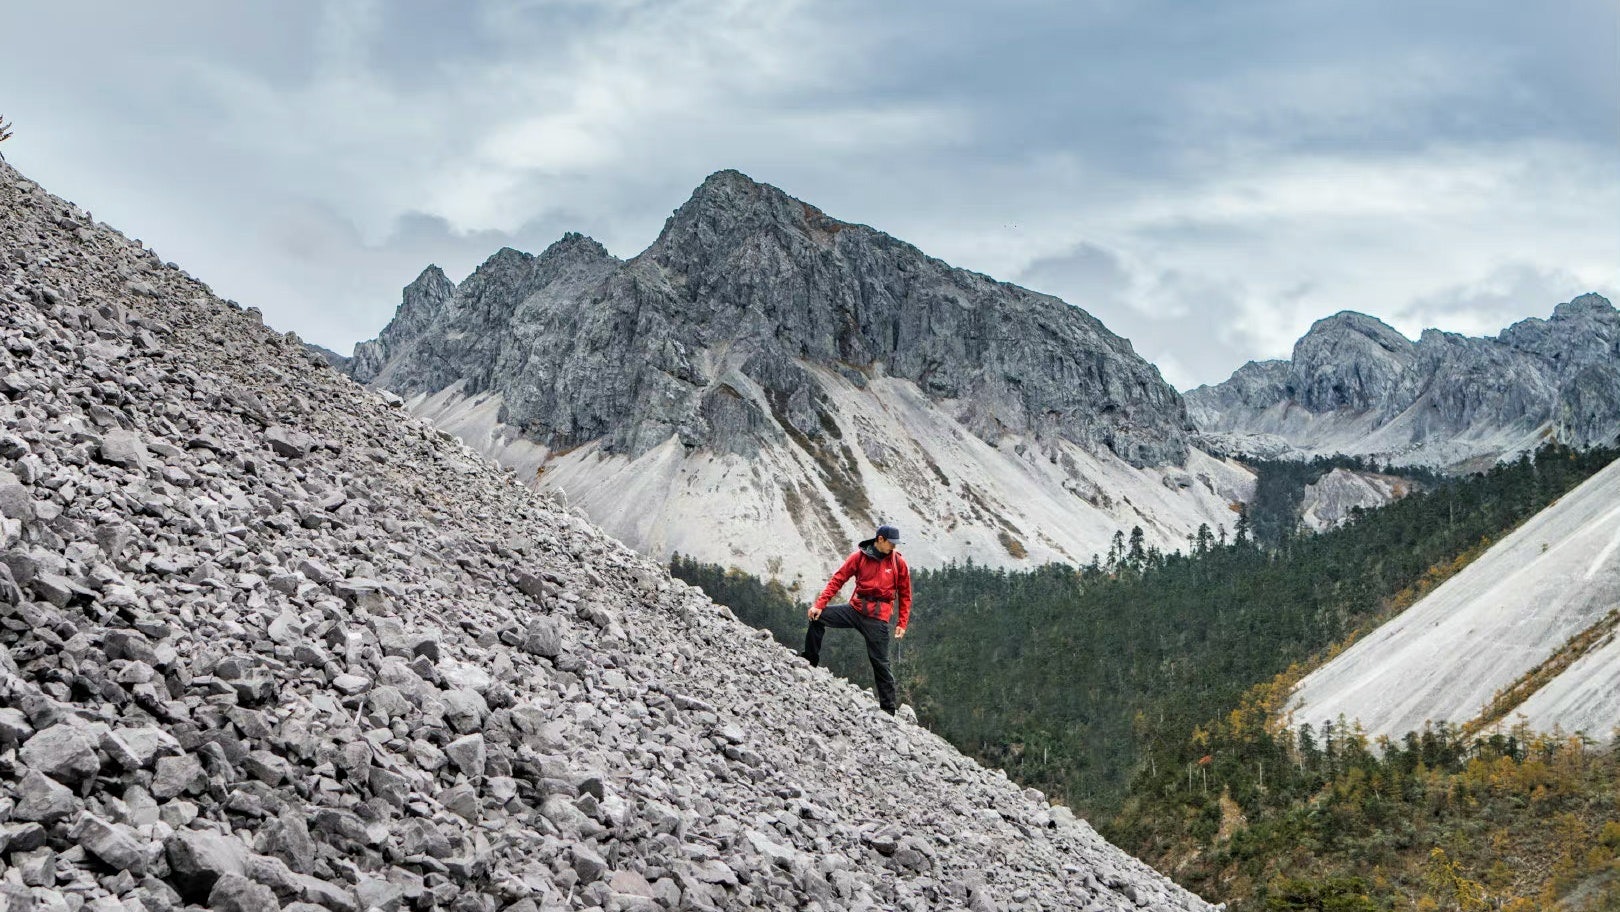 Adventure and outdoor sports like cycling, skiing and hiking are booming in China. How can luxury brands capitalize on this growing market? Photo: Arc'teryx